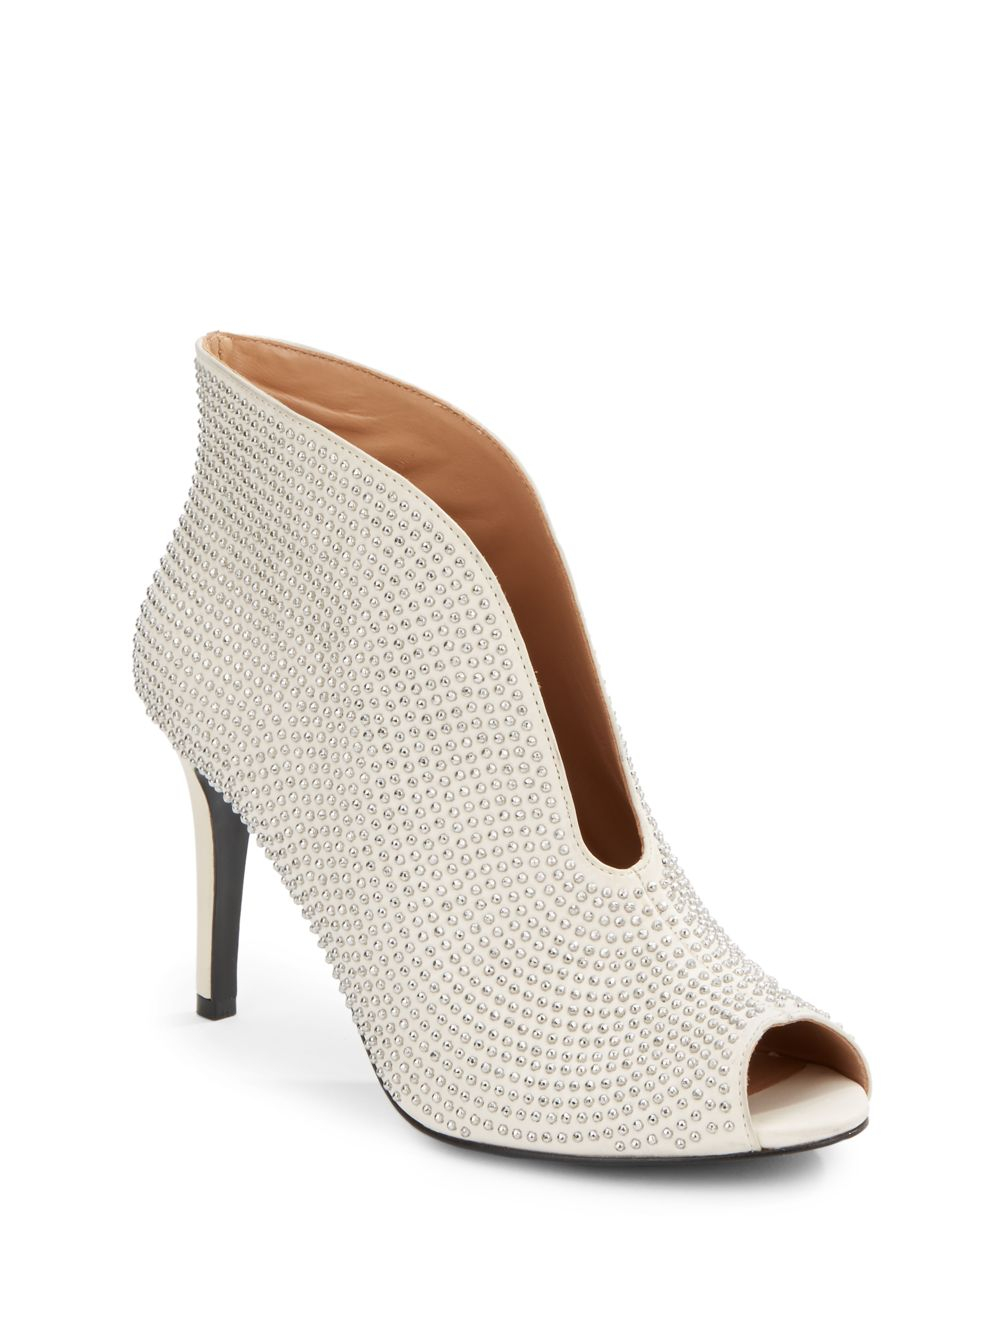 Vince Camuto Signature Rimona Studded Leather Peep-toe Booties in White |  Lyst